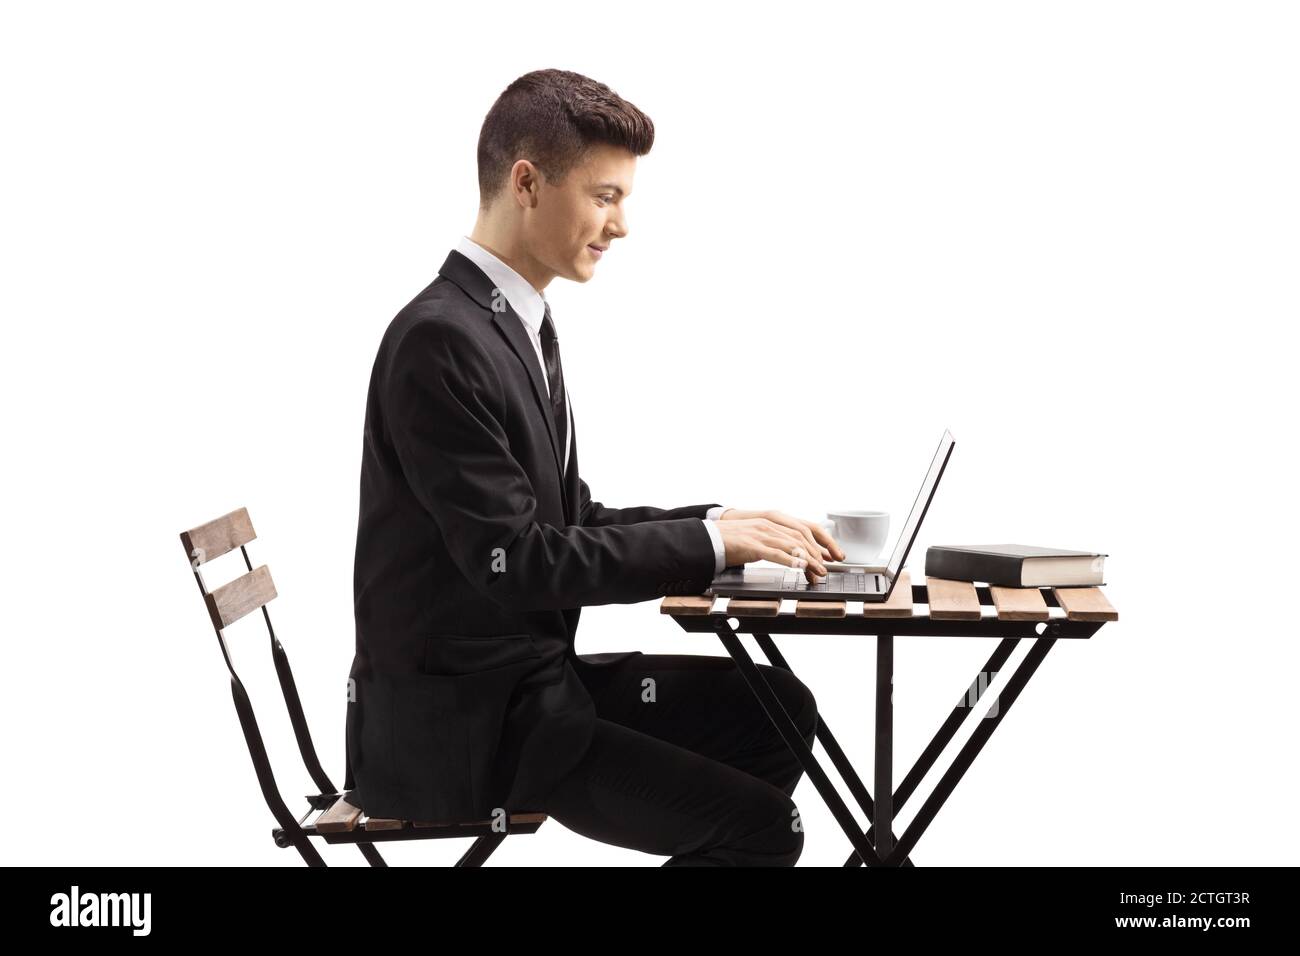 Guy in a suit sitting at a coffee table and working on a laptop isolated on white background Stock Photo